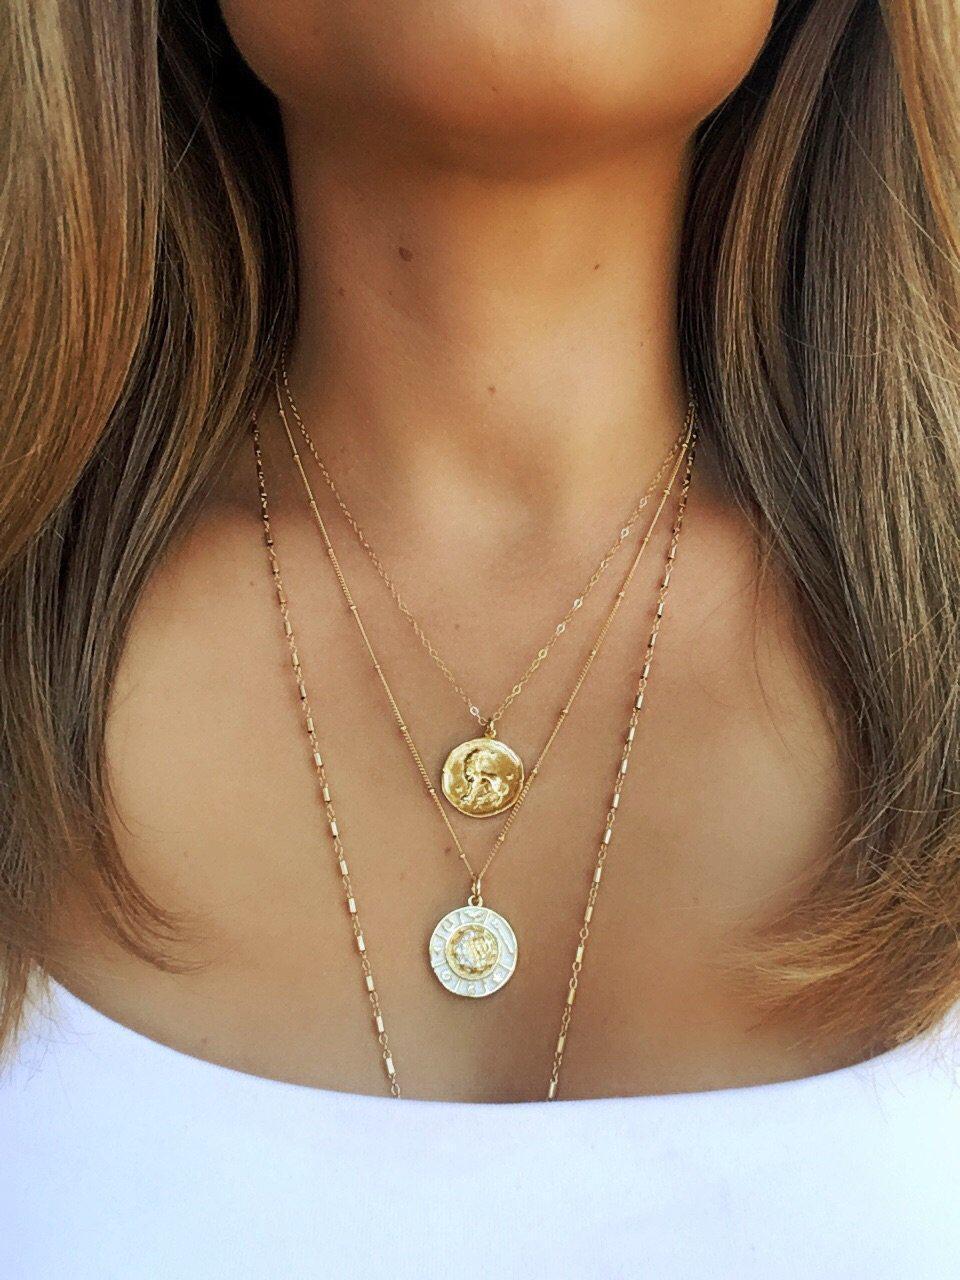 Leo Zodiac Necklace in Gold-Necklaces-Waffles & Honey Jewelry-Waffles & Honey Jewelry